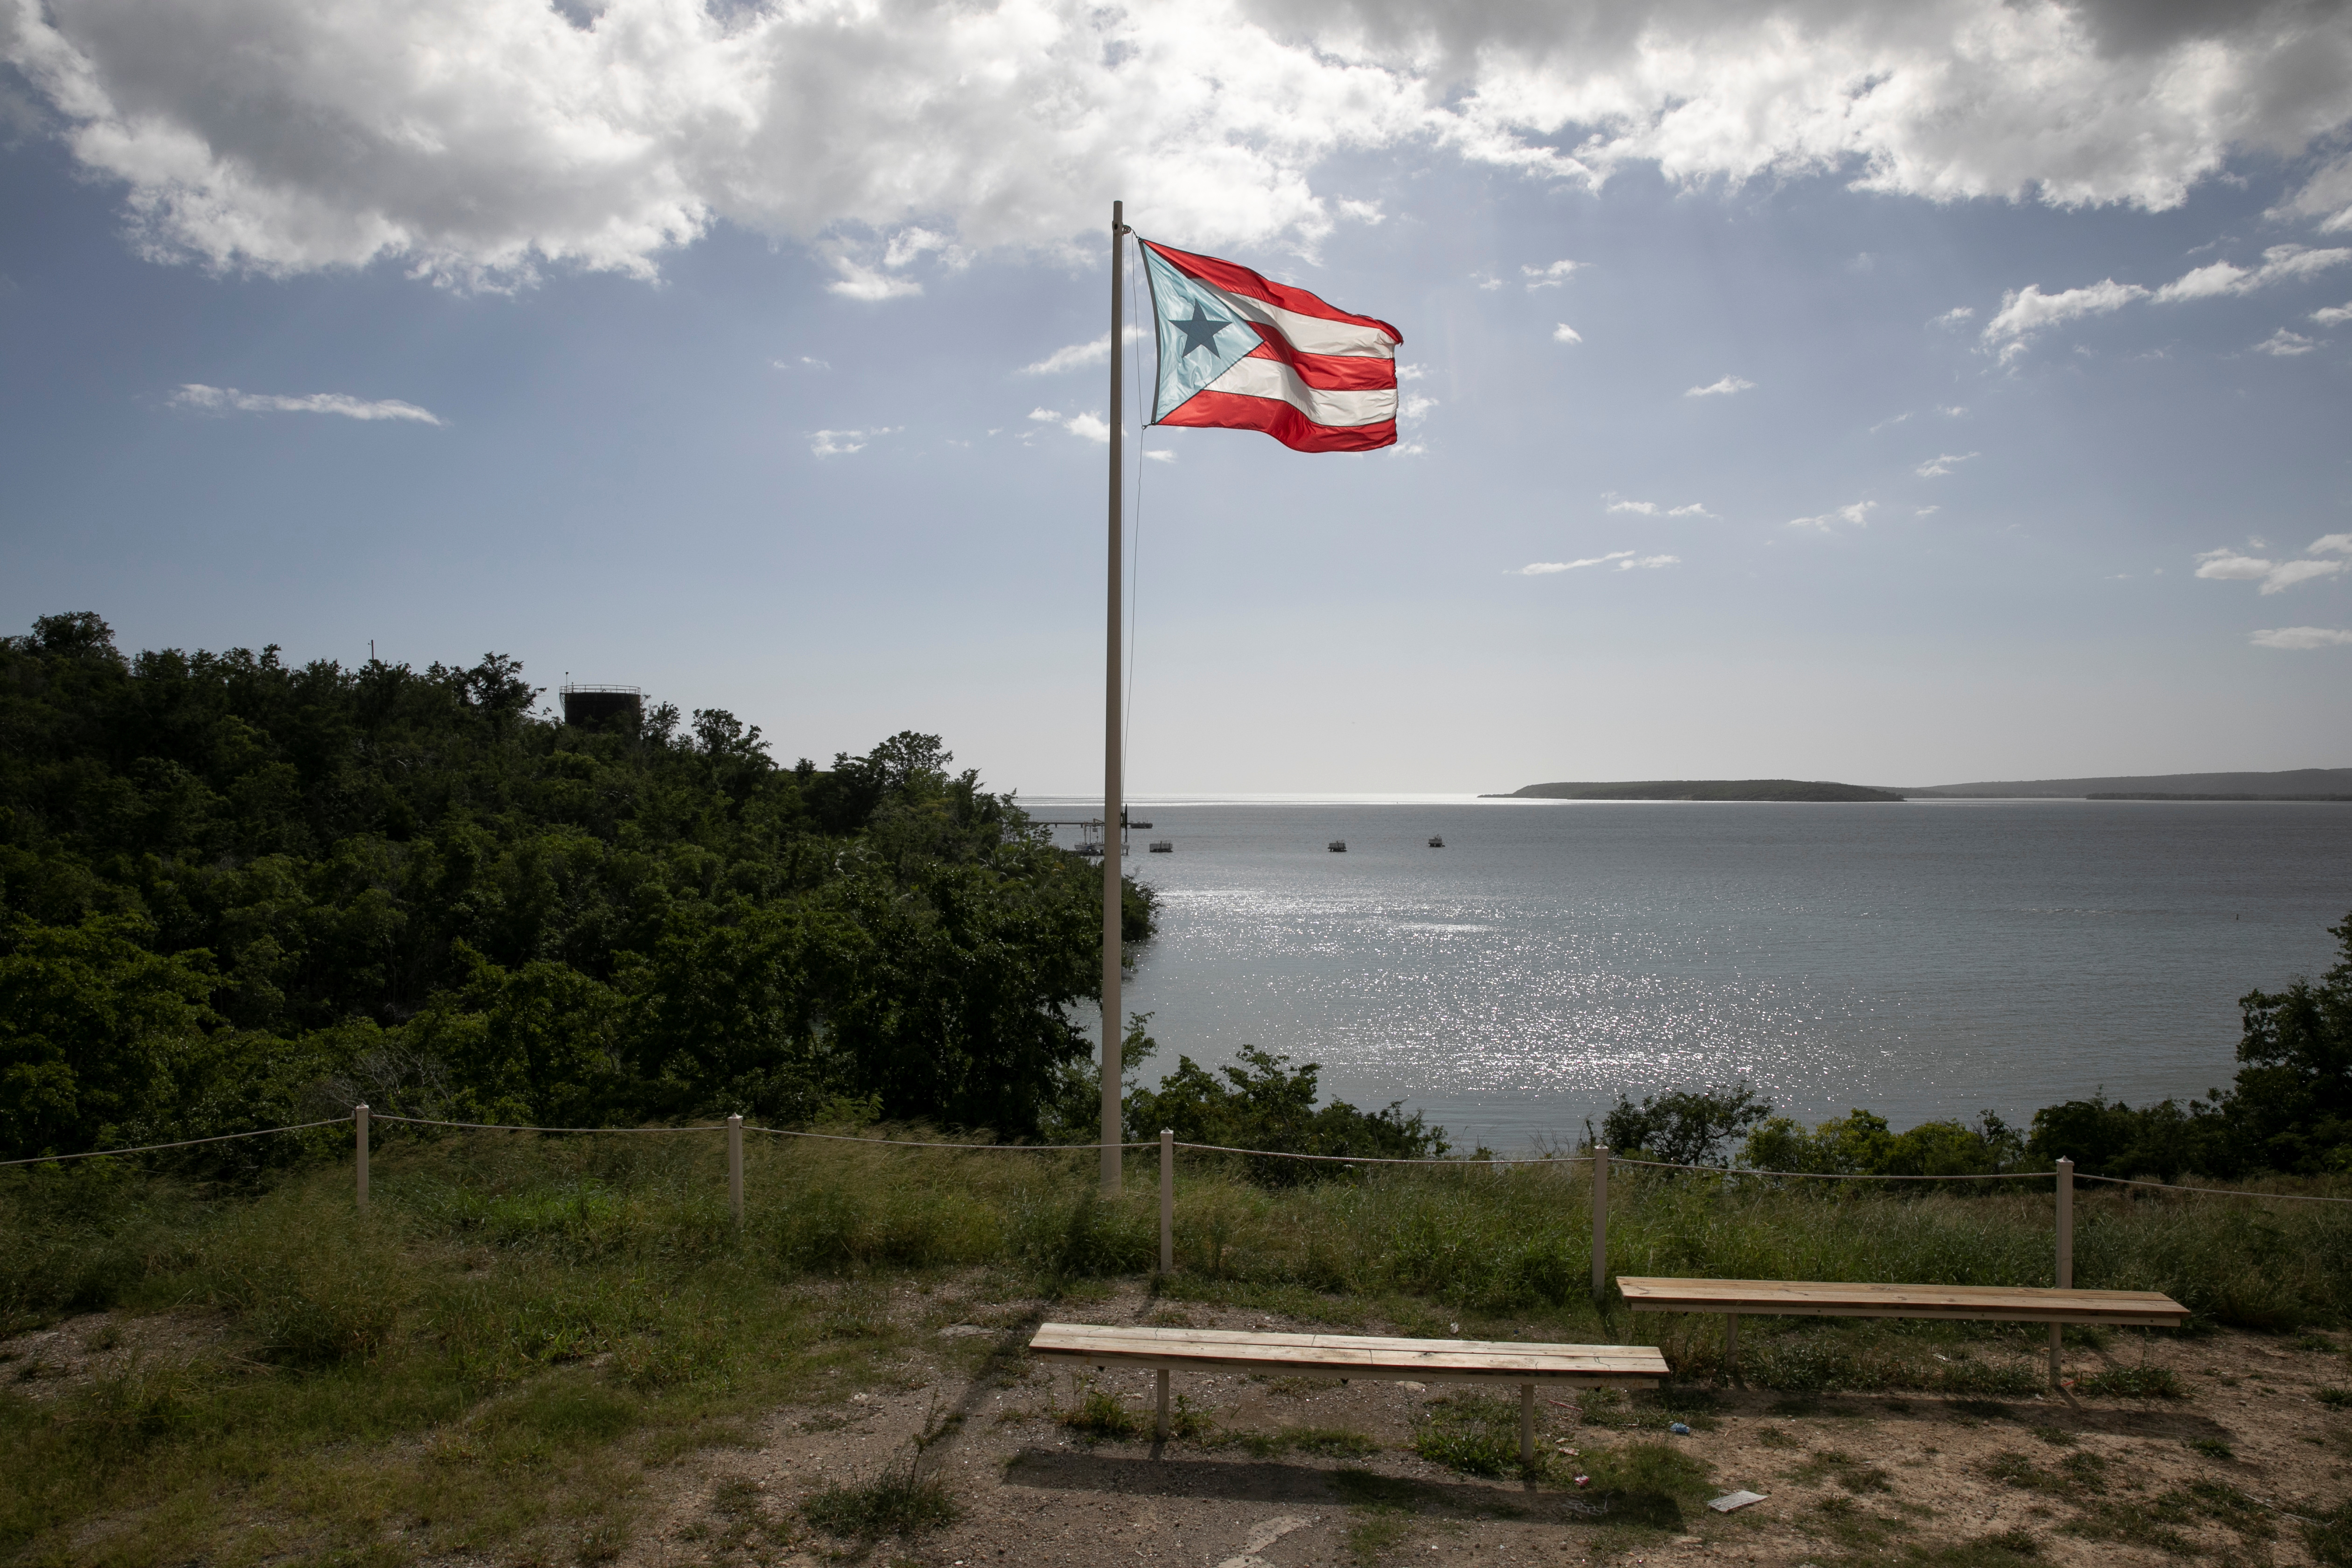 A Puerto Rican flag flies in front of the bay after the earthquake in Guayanilla